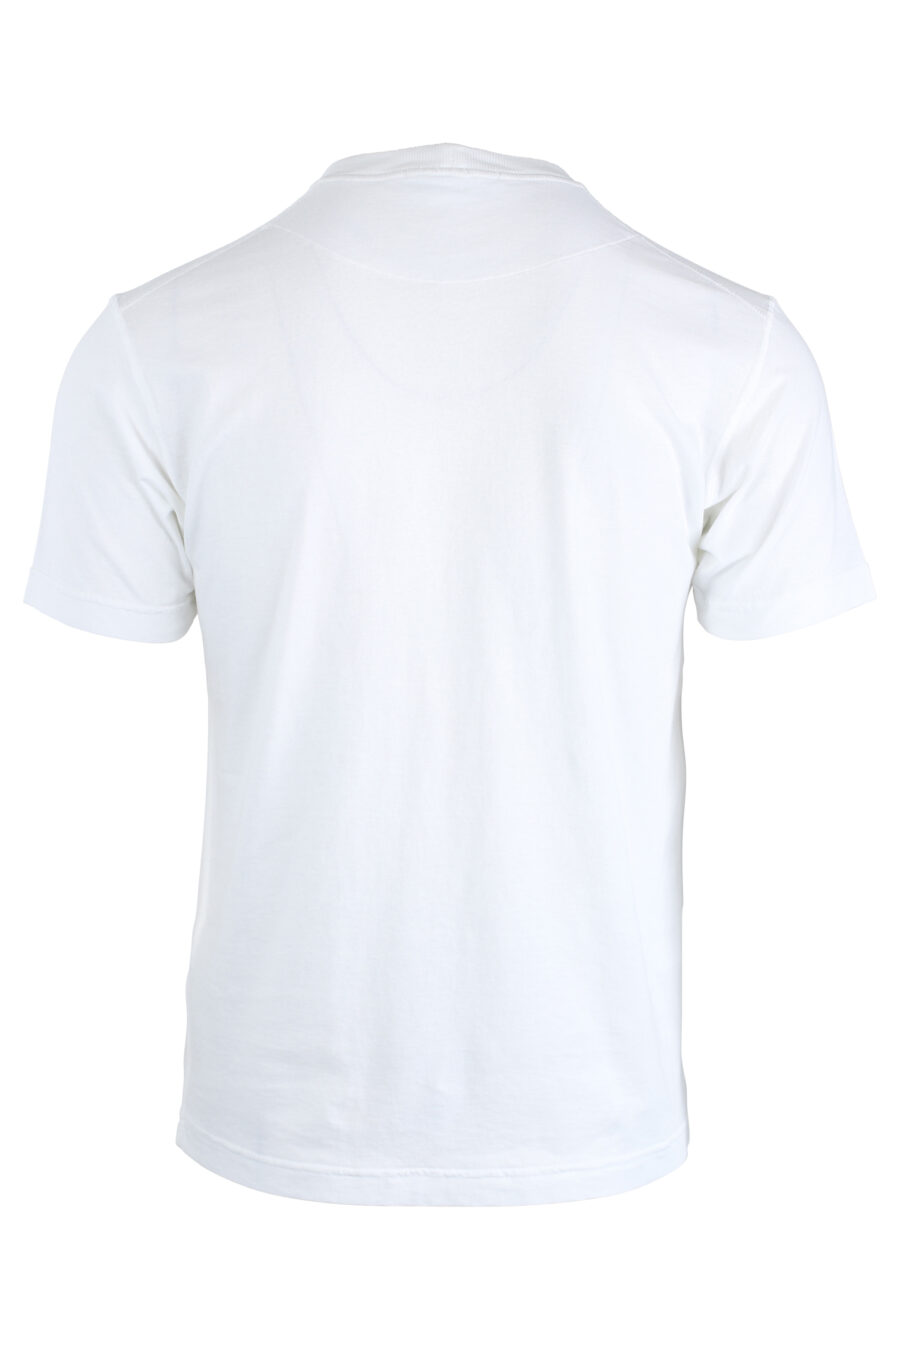 White T-shirt with pocket - IMG 1686